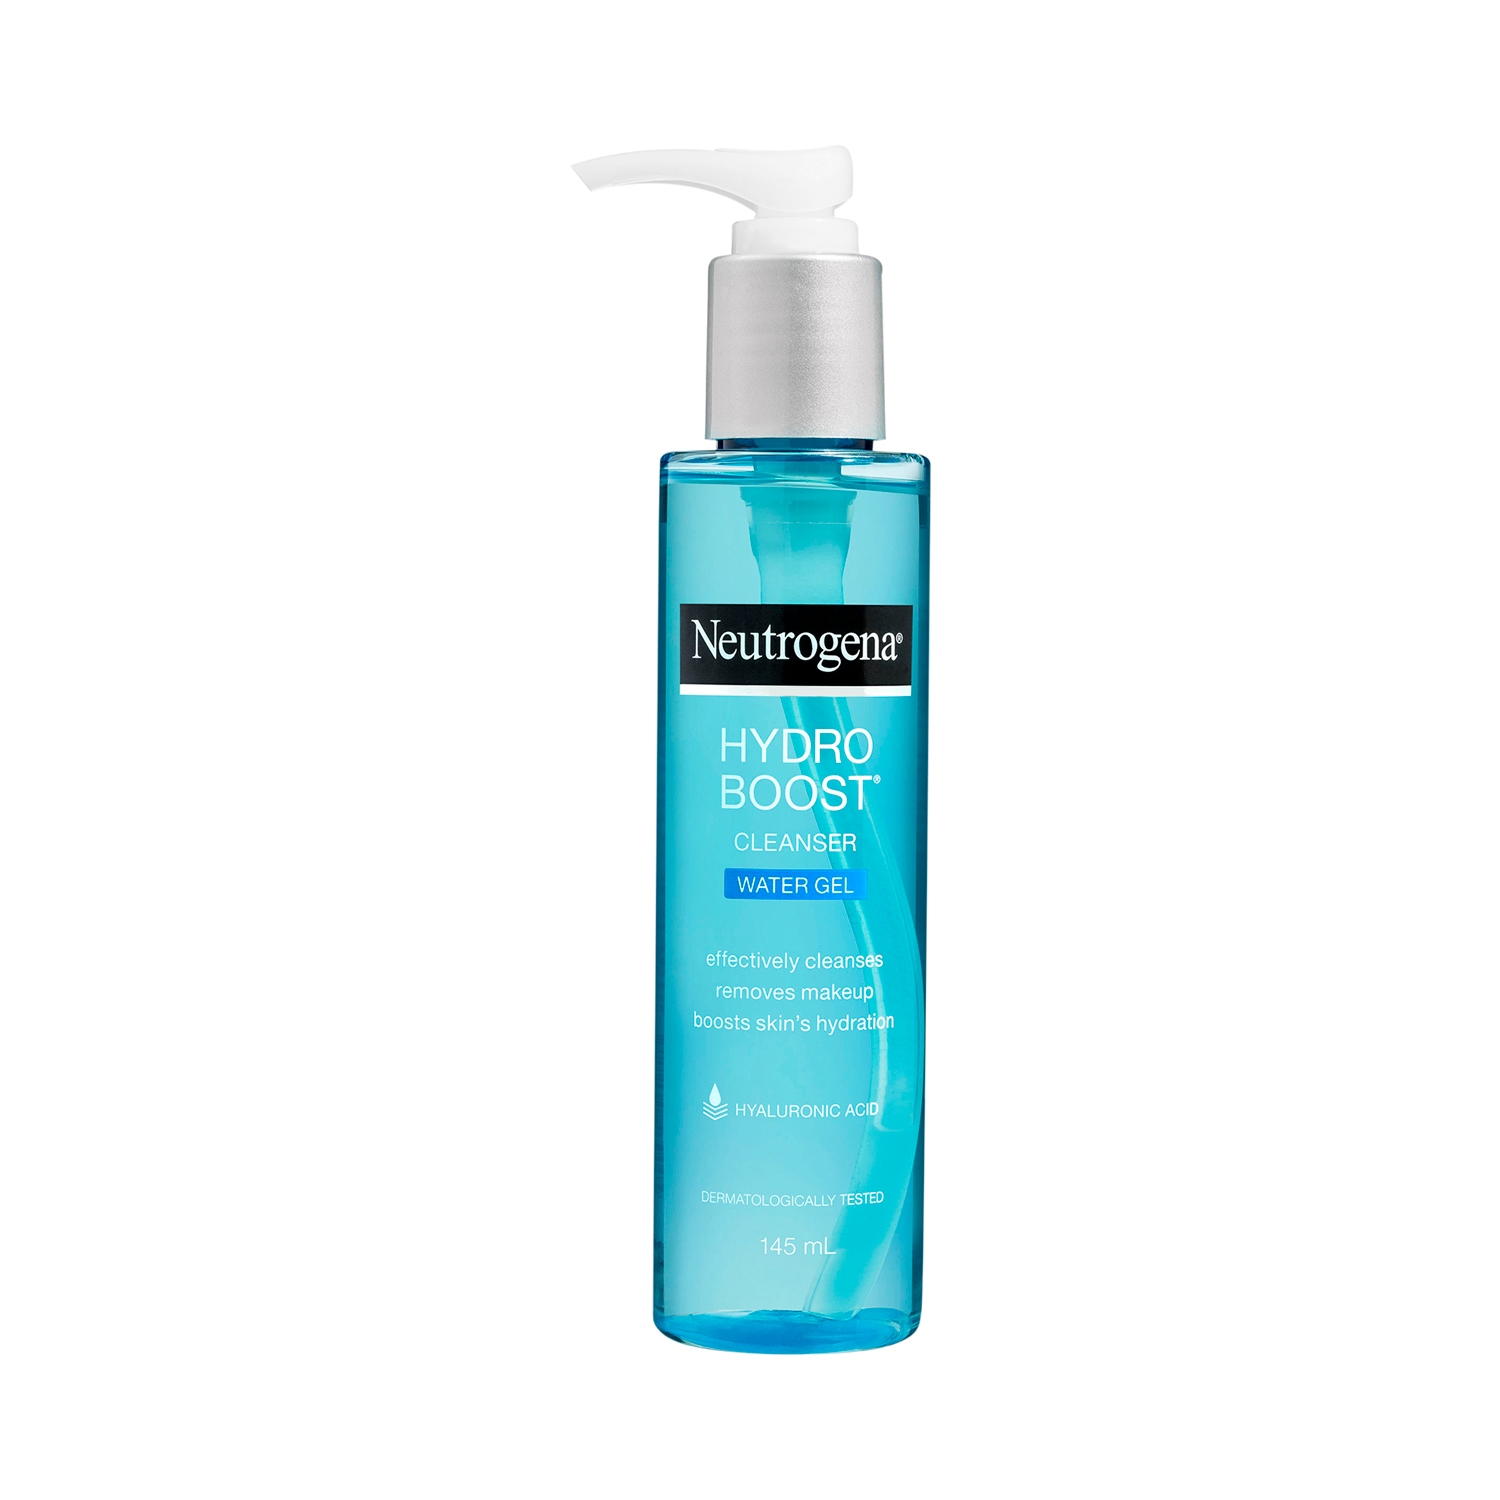 Neutrogena Hydro Boost Cleanser Water Gel Face Wash with Hyaluronic Acid  for 24 Hours Hydration (145ml)